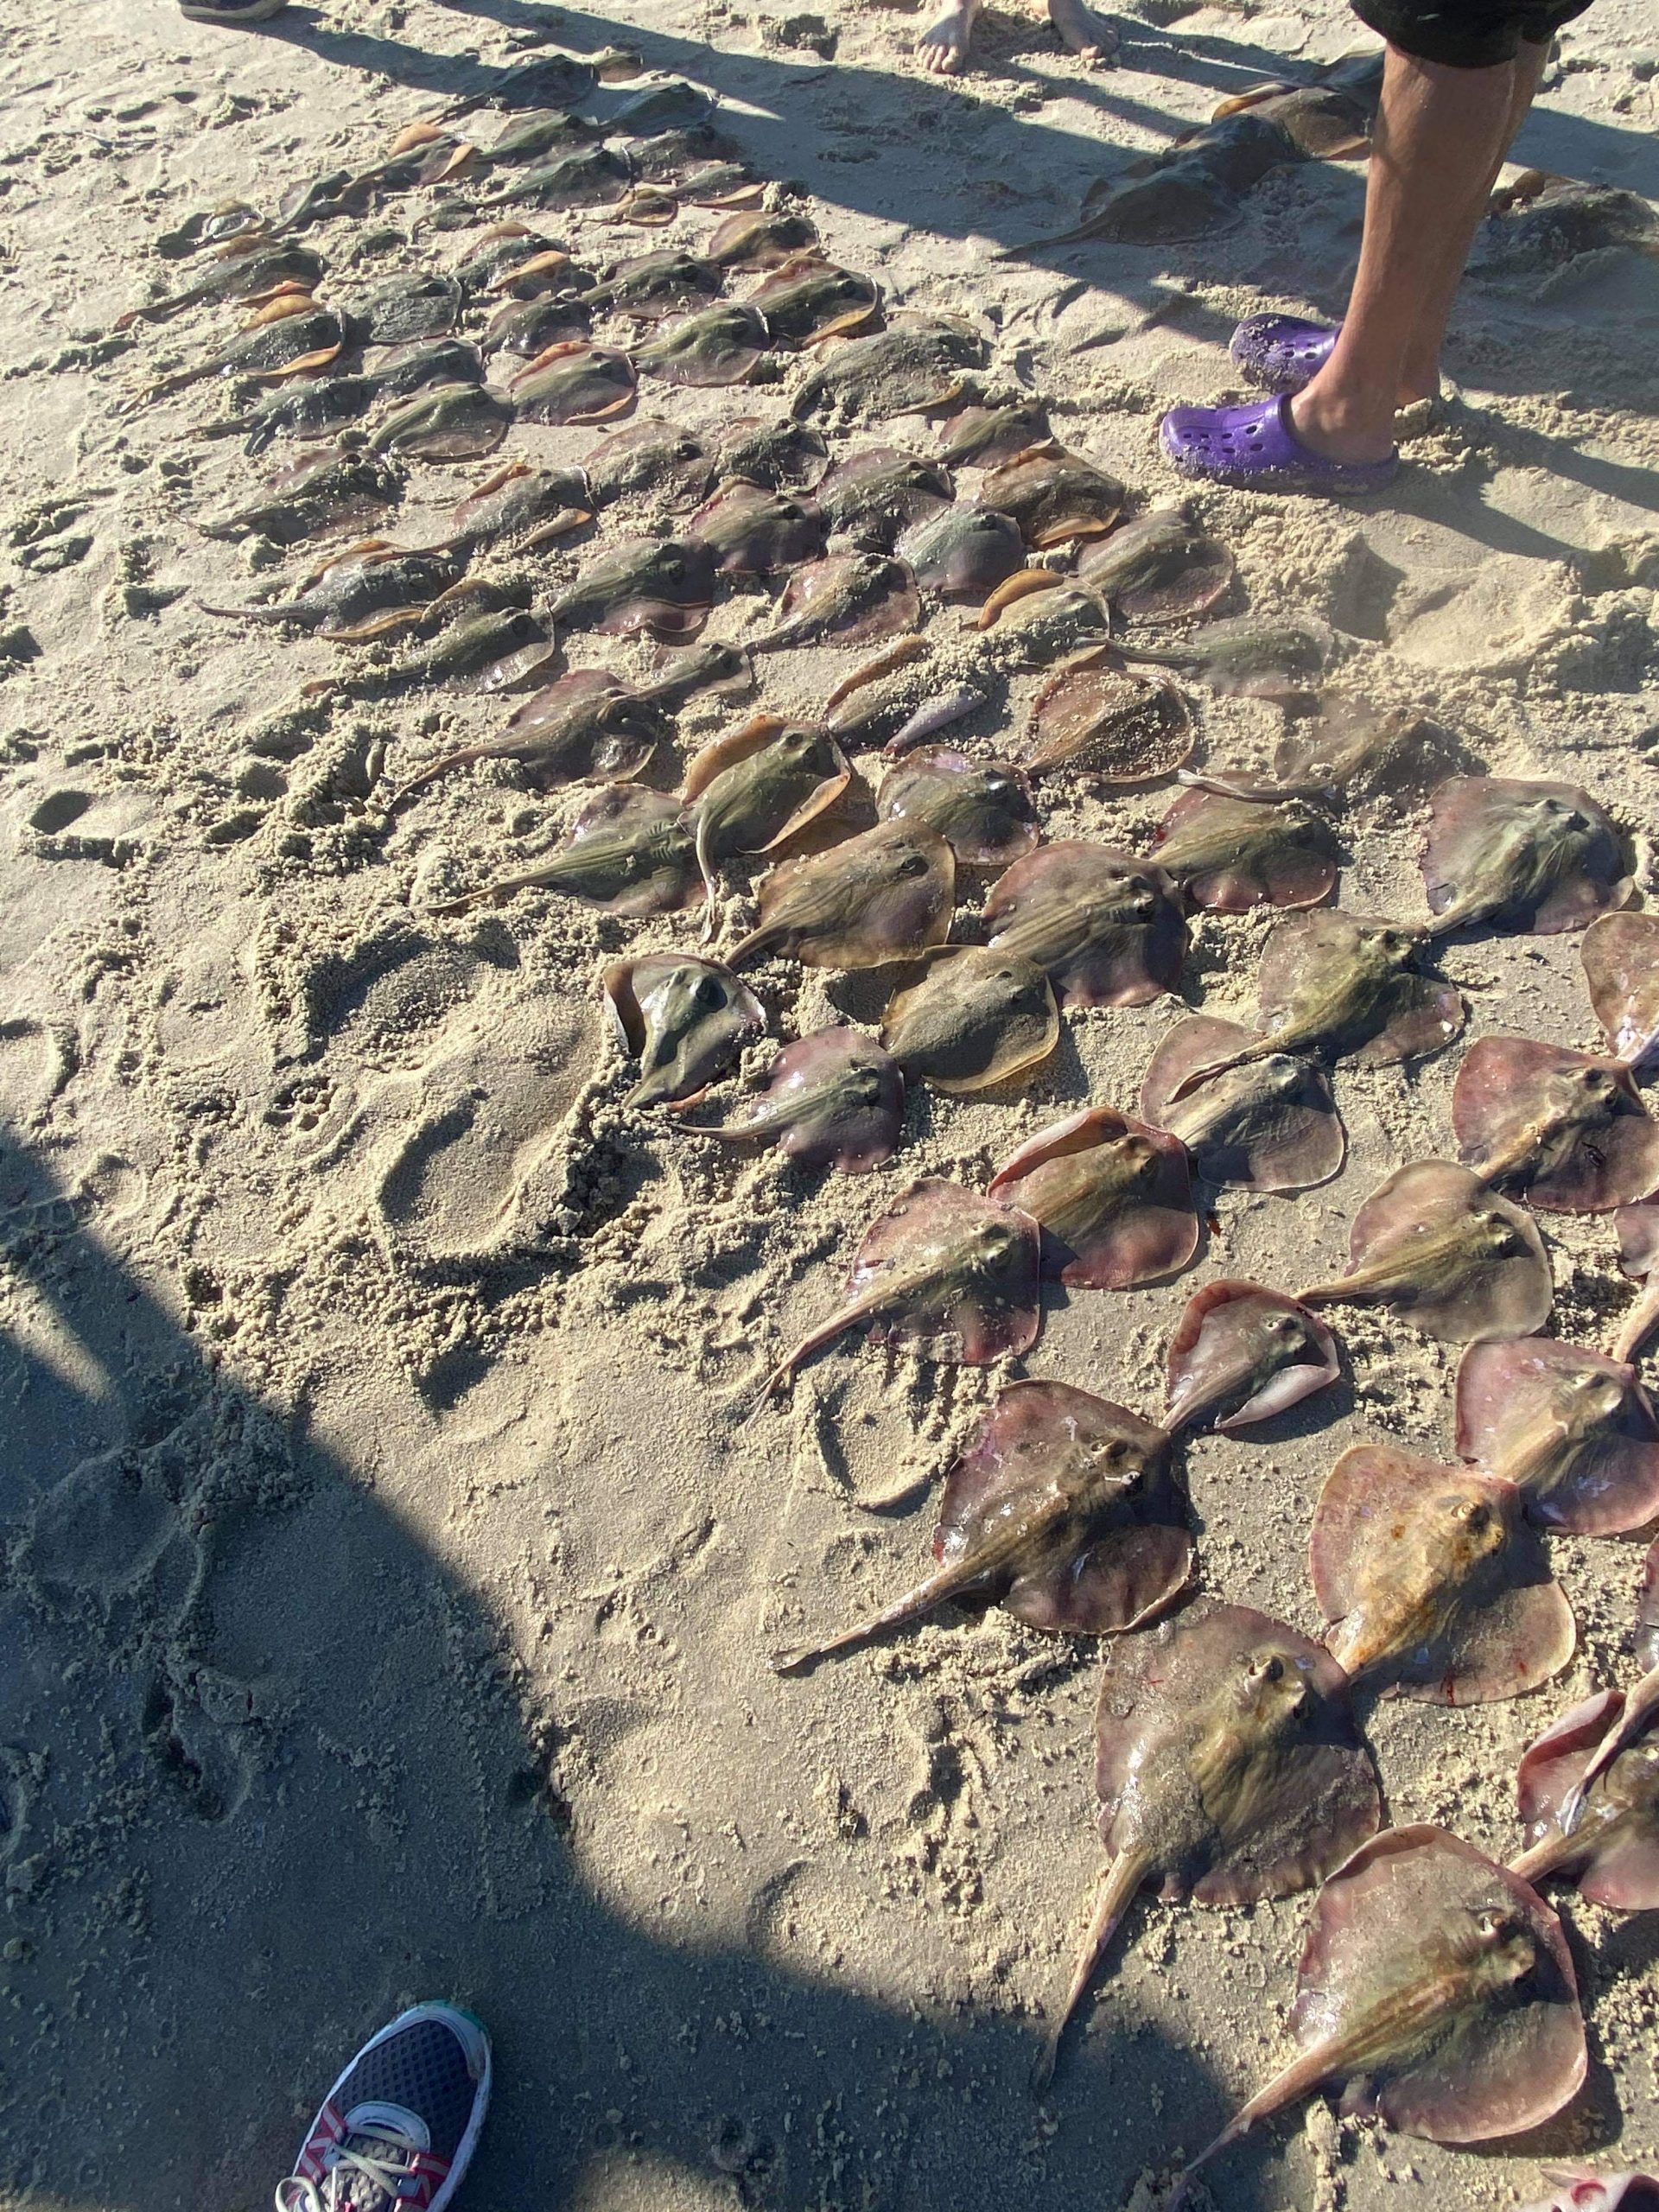 Masses of deceased rays at Jimmies Beach